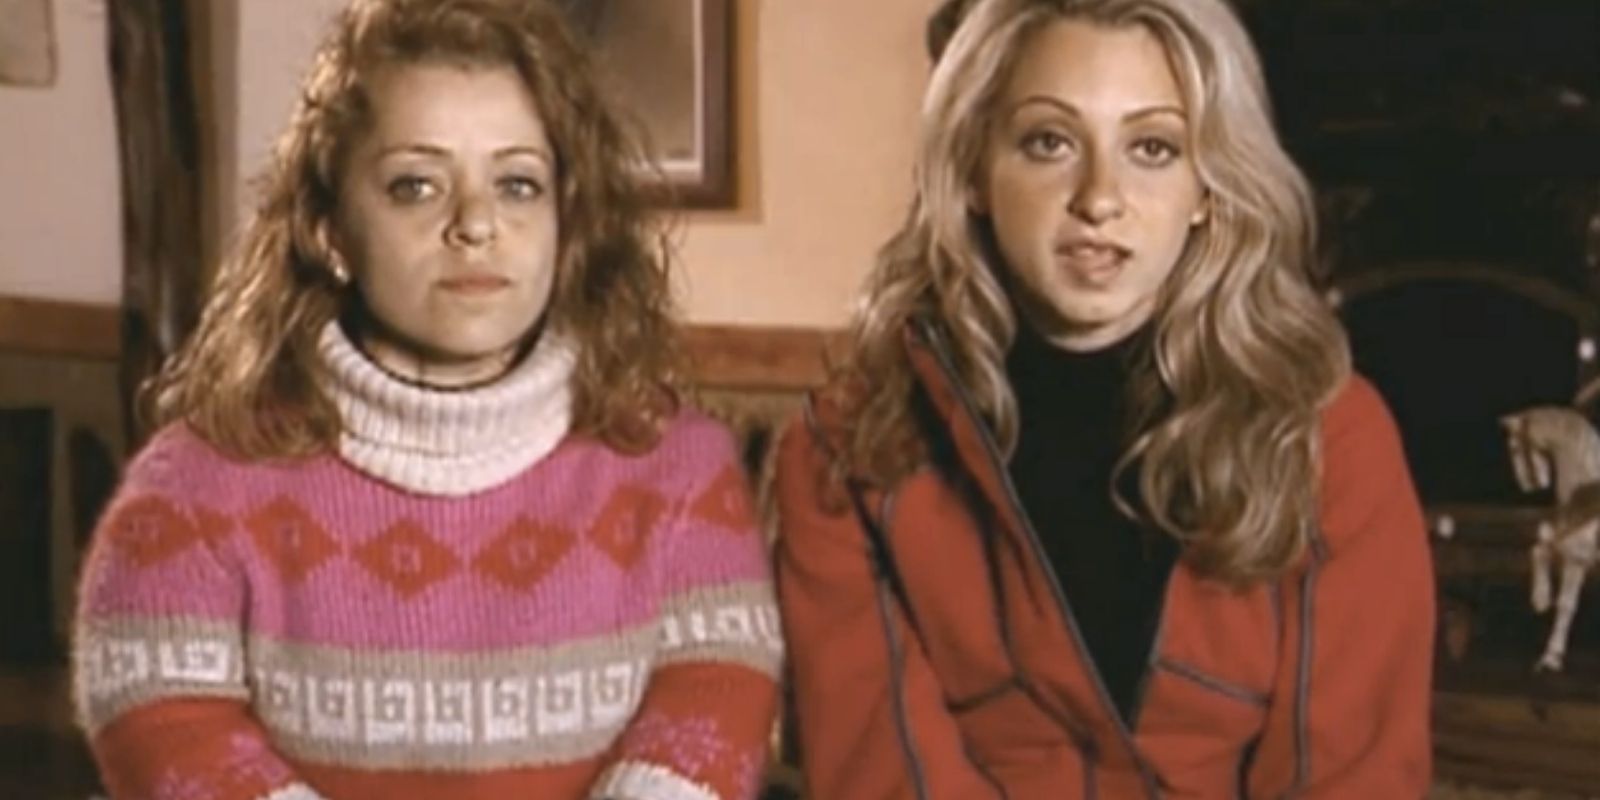 Mirna and Charla in The Amazing Race talking to camera with sweaters on.